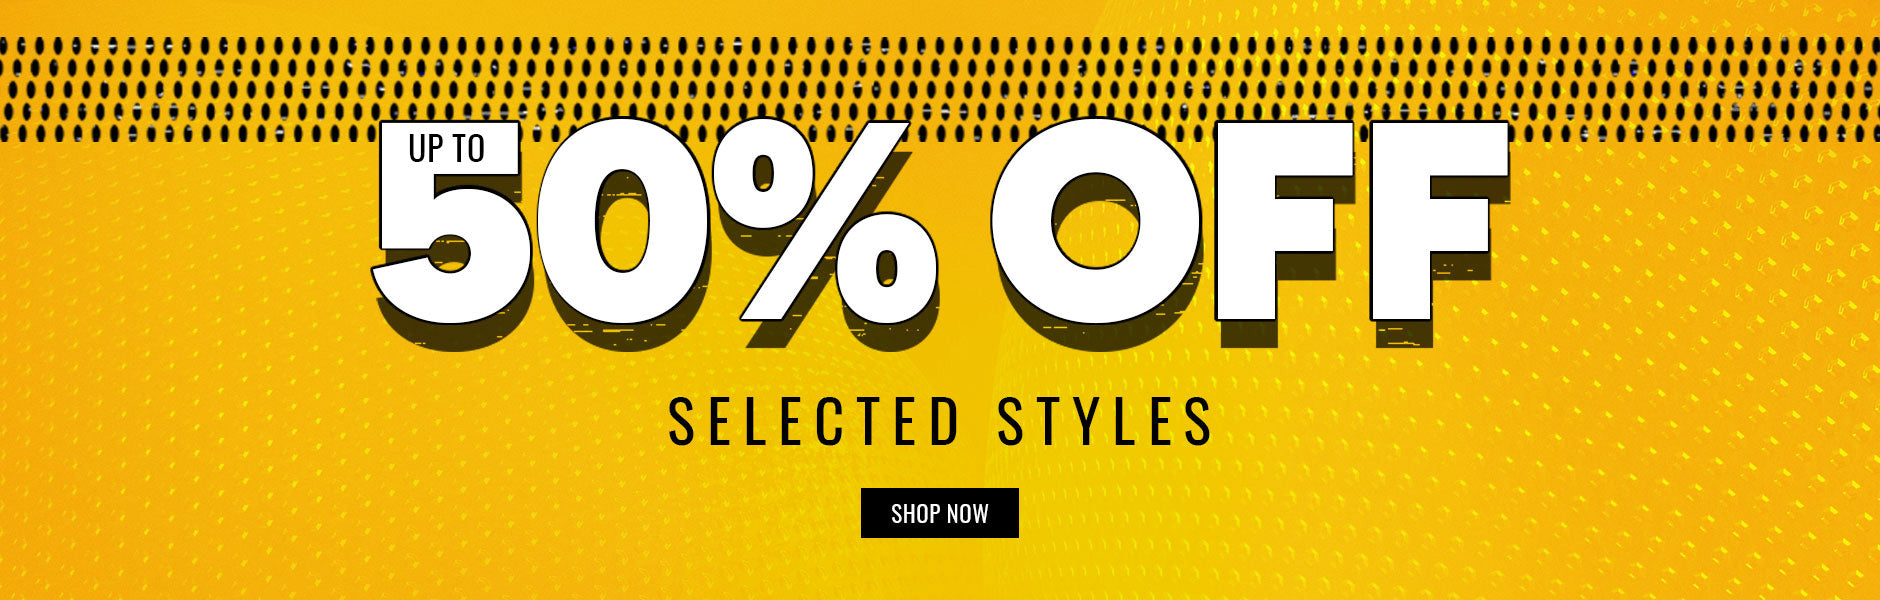 UP TO 50% OFF SELECTED STYLES. SHOP NOW